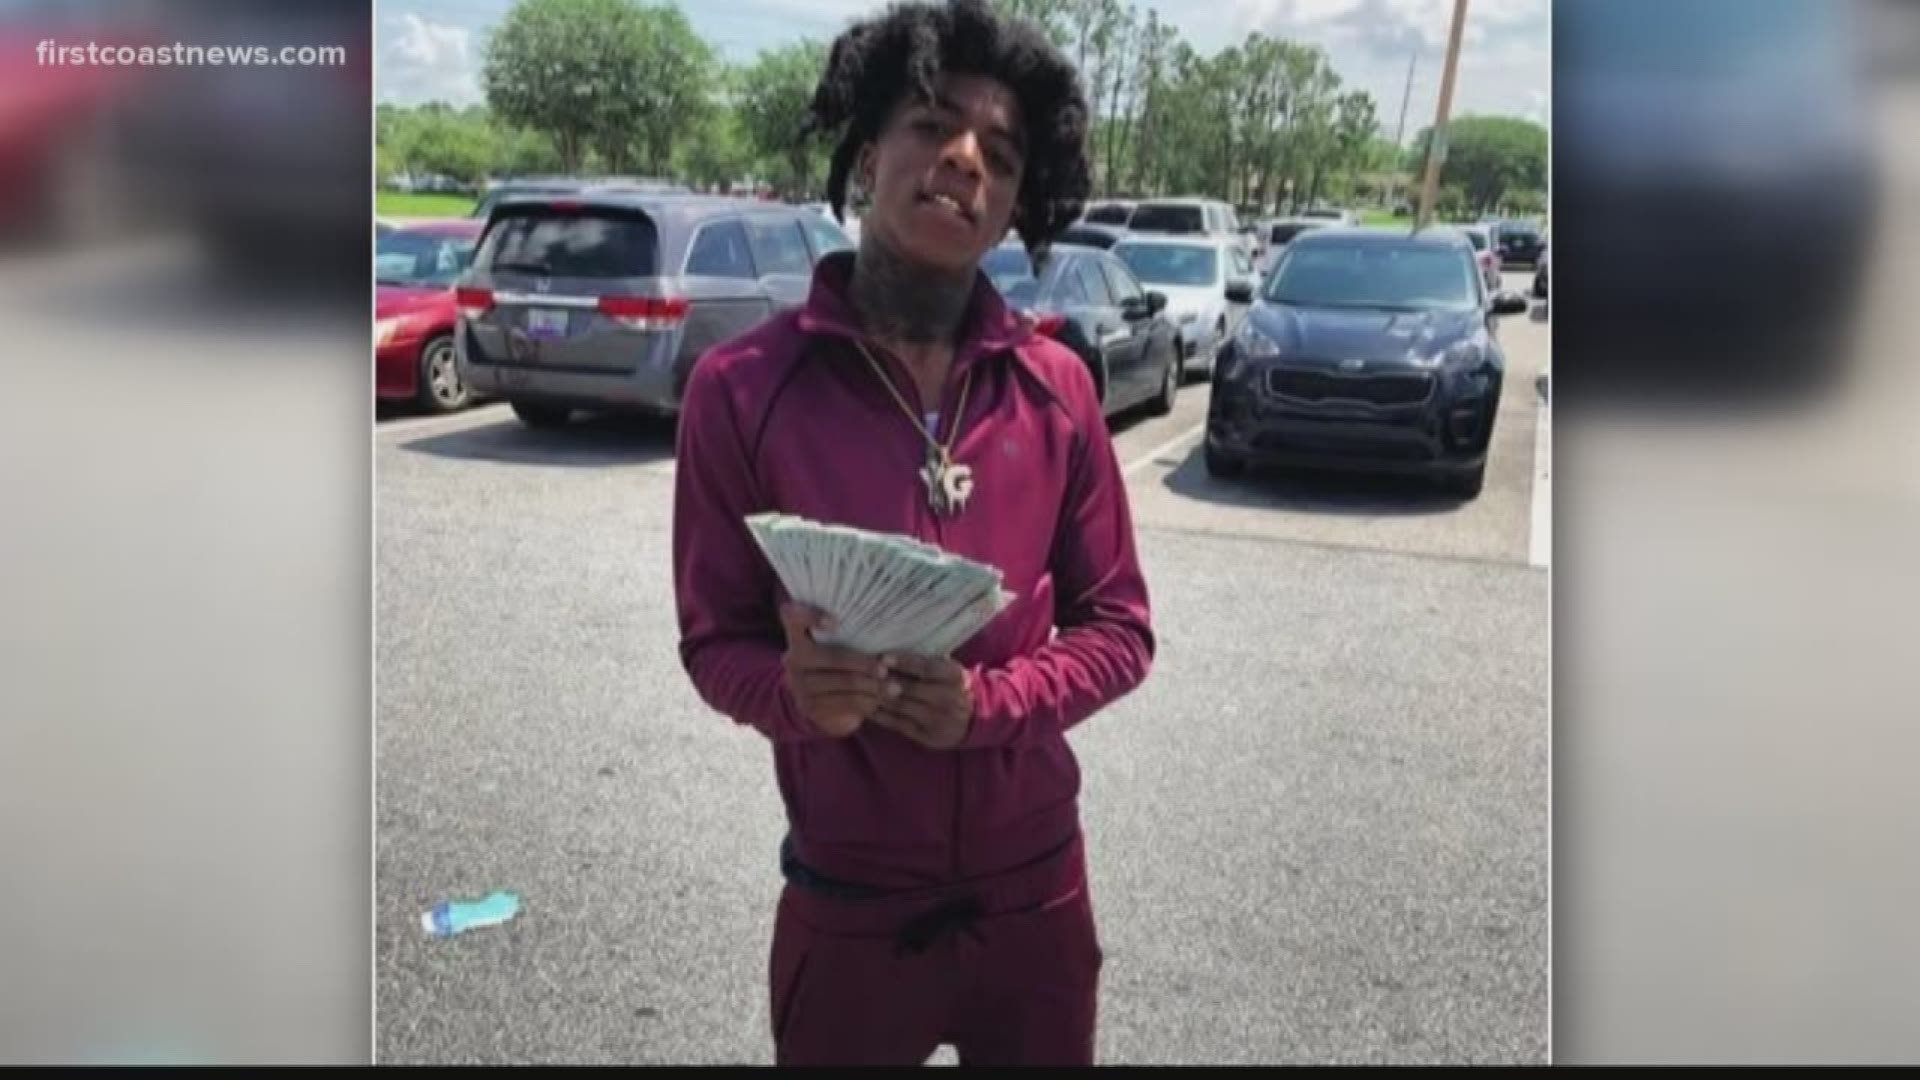 A Jacksonville rapper has been arrested for violating his probation after he reportedly held a gun at a gun shop prior to a fatal shooting near the Town Center.